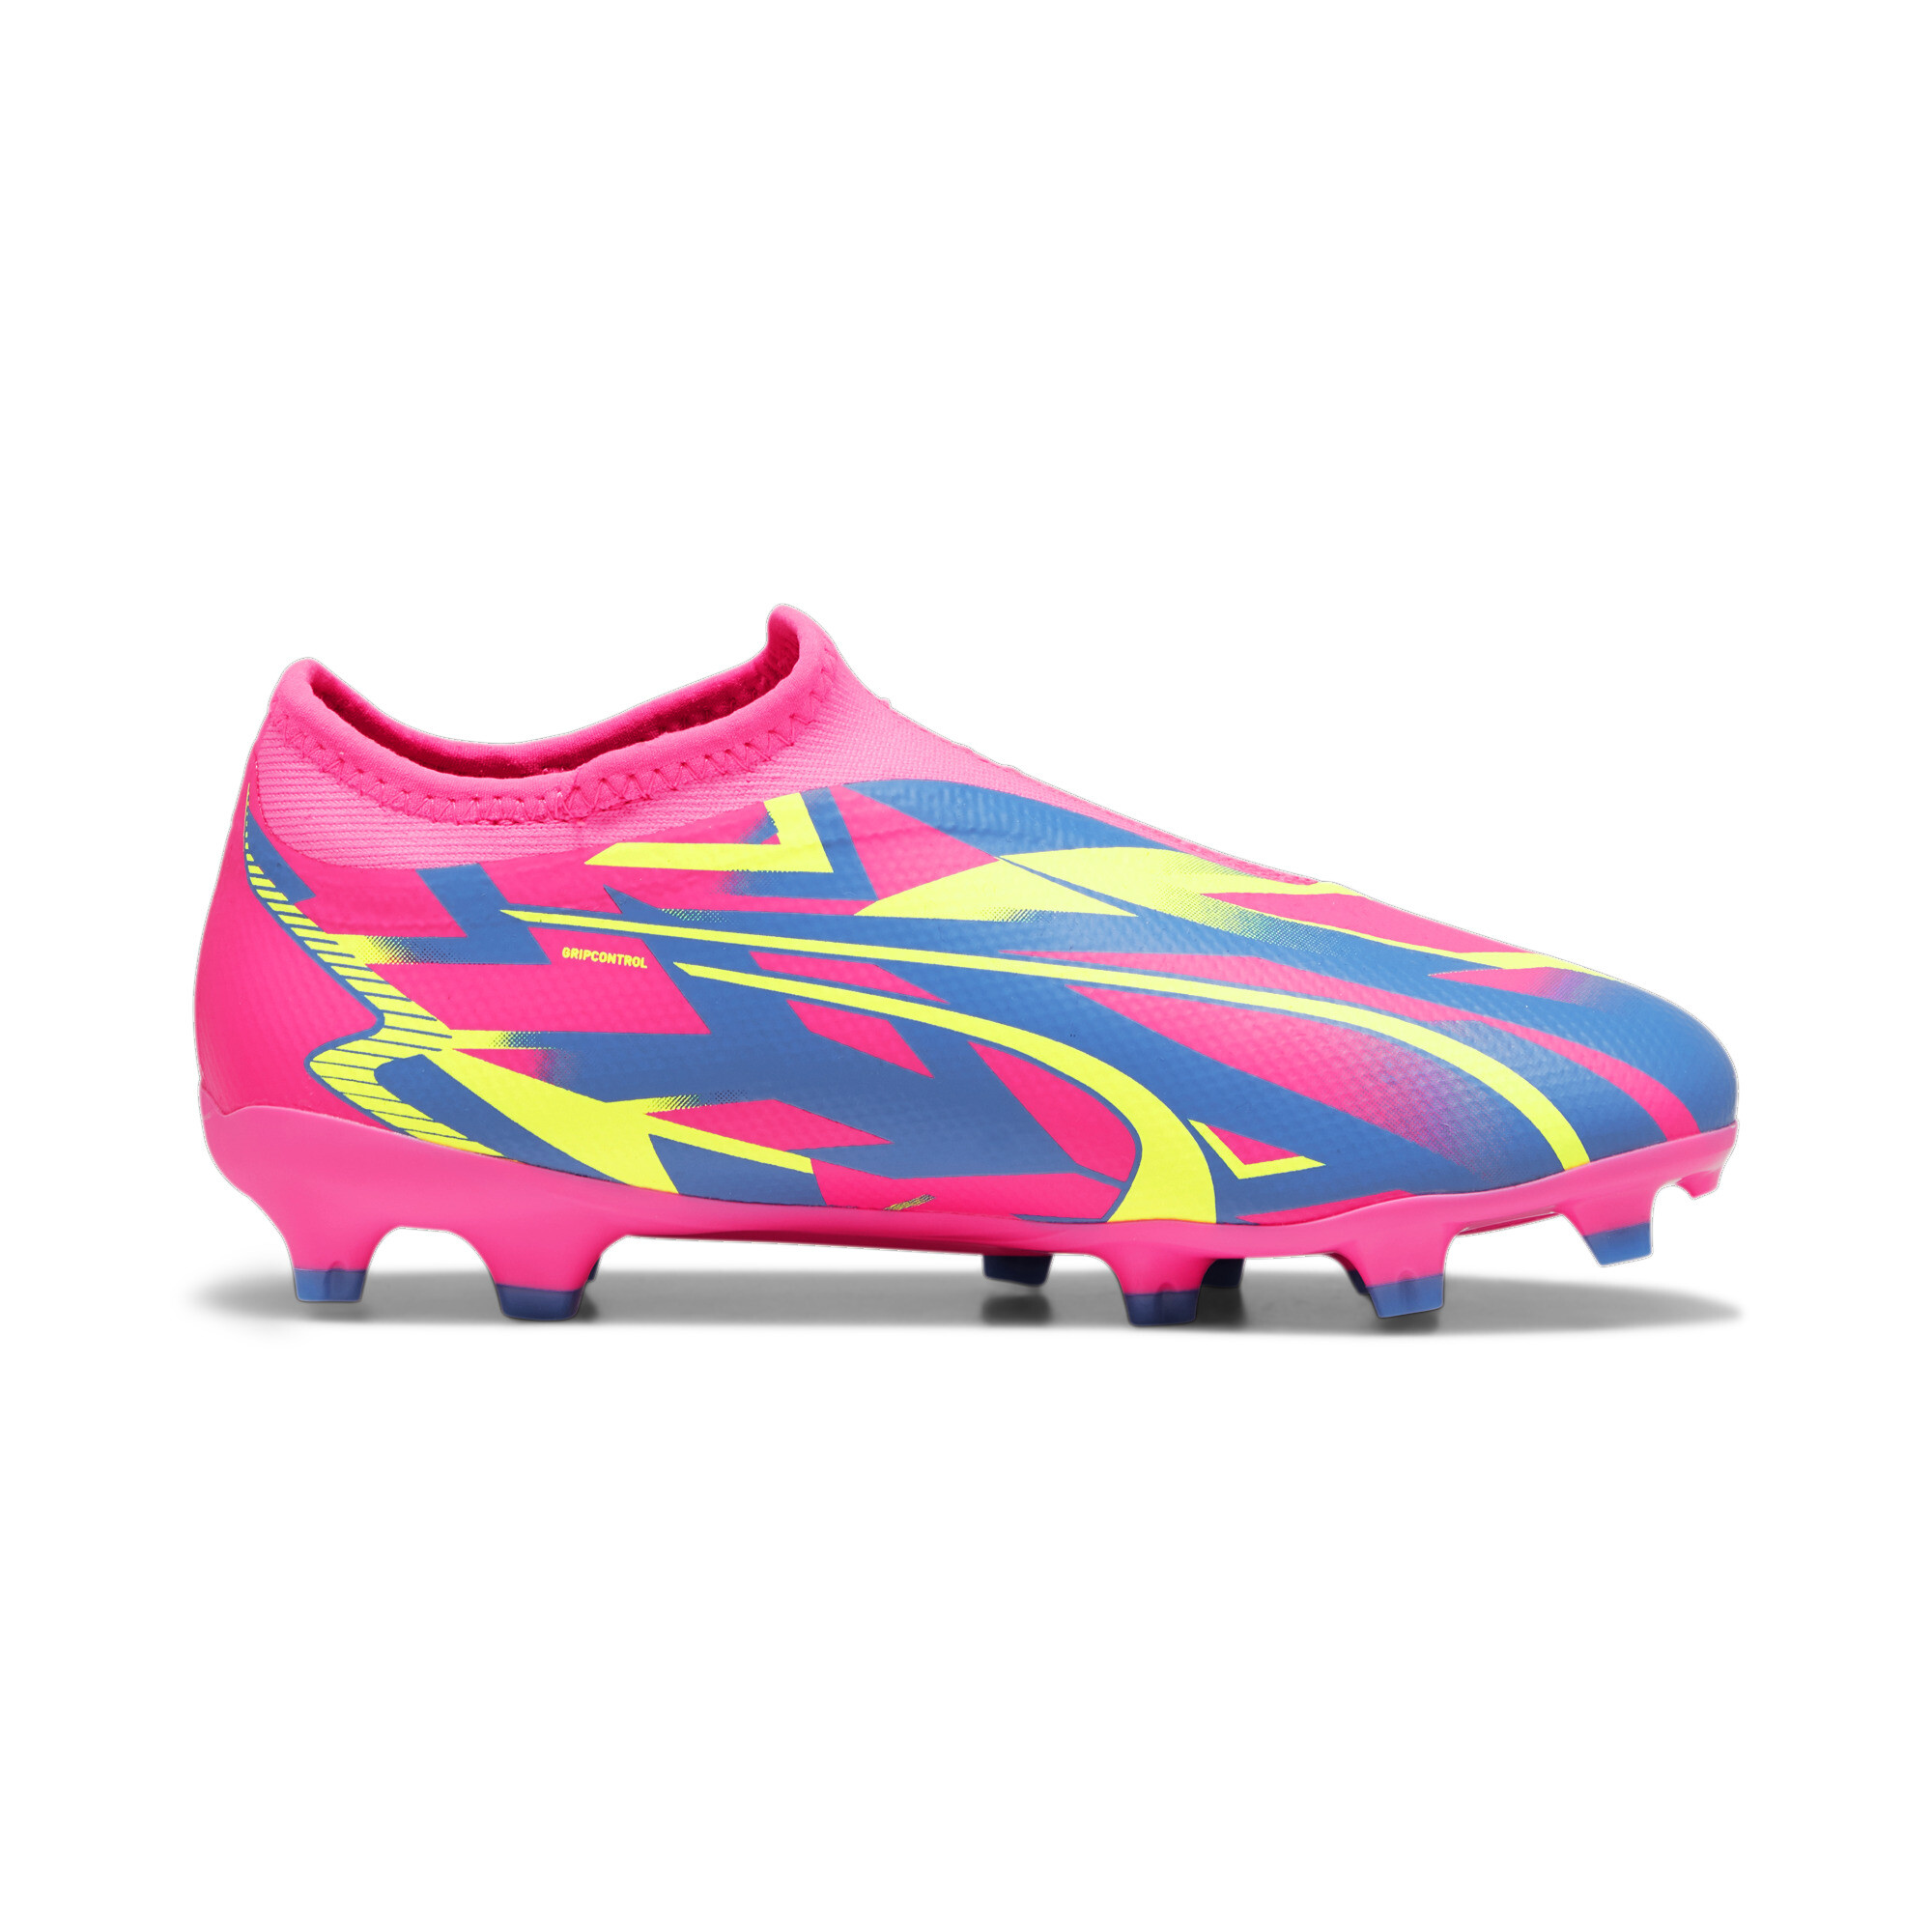 Puma ULTRA MATCH LL ENERGY FG/AG Youth Football Boots, Pink, Size 29, Shoes